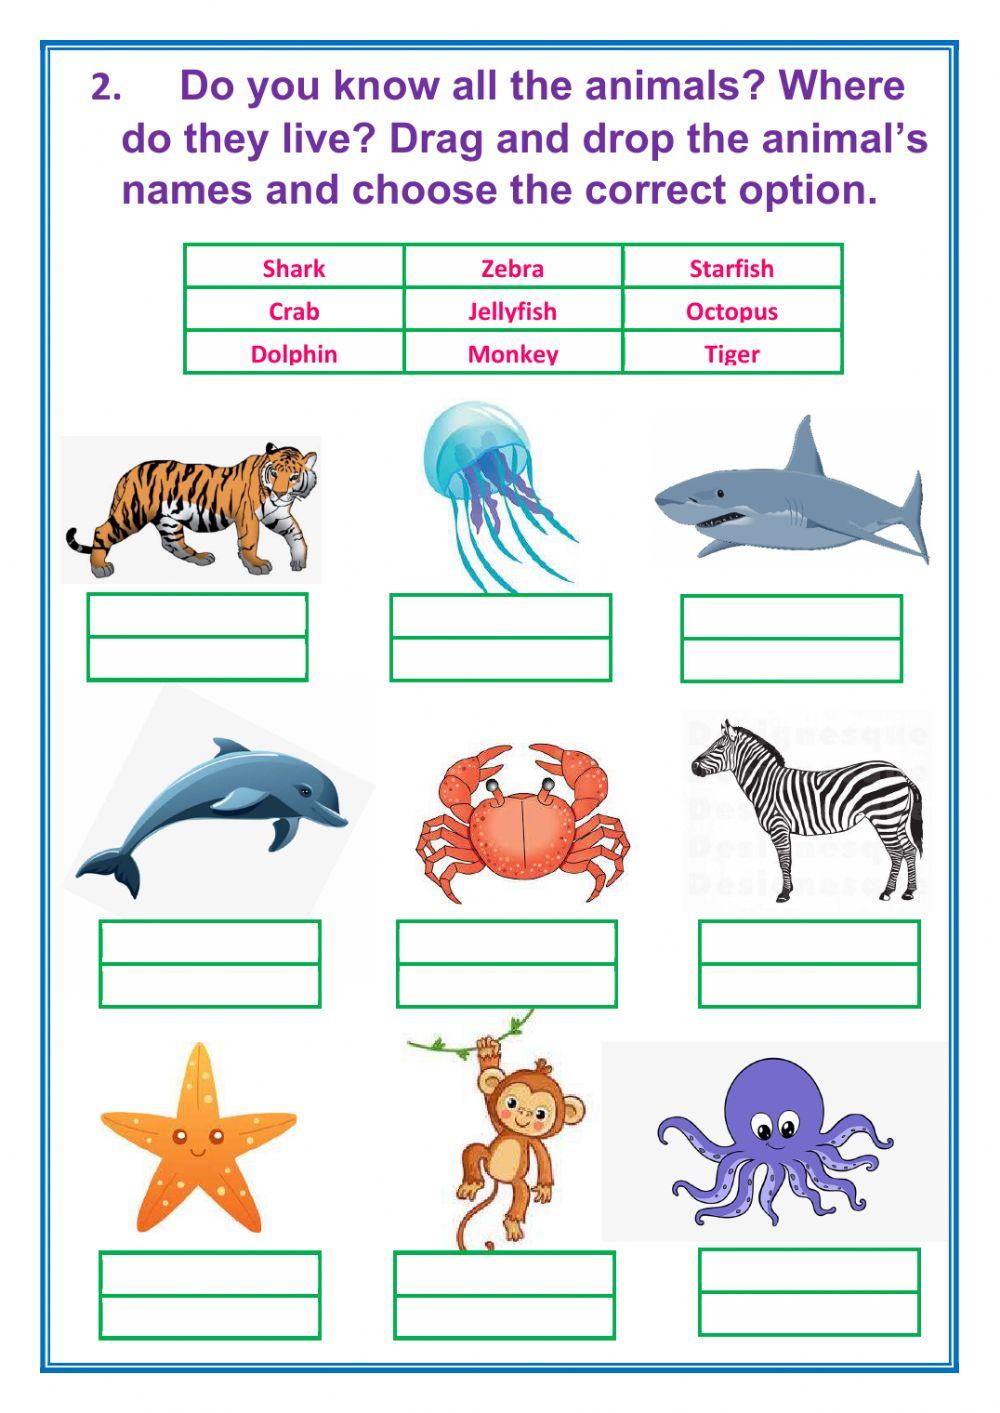 Means of Transportation-Sea animals